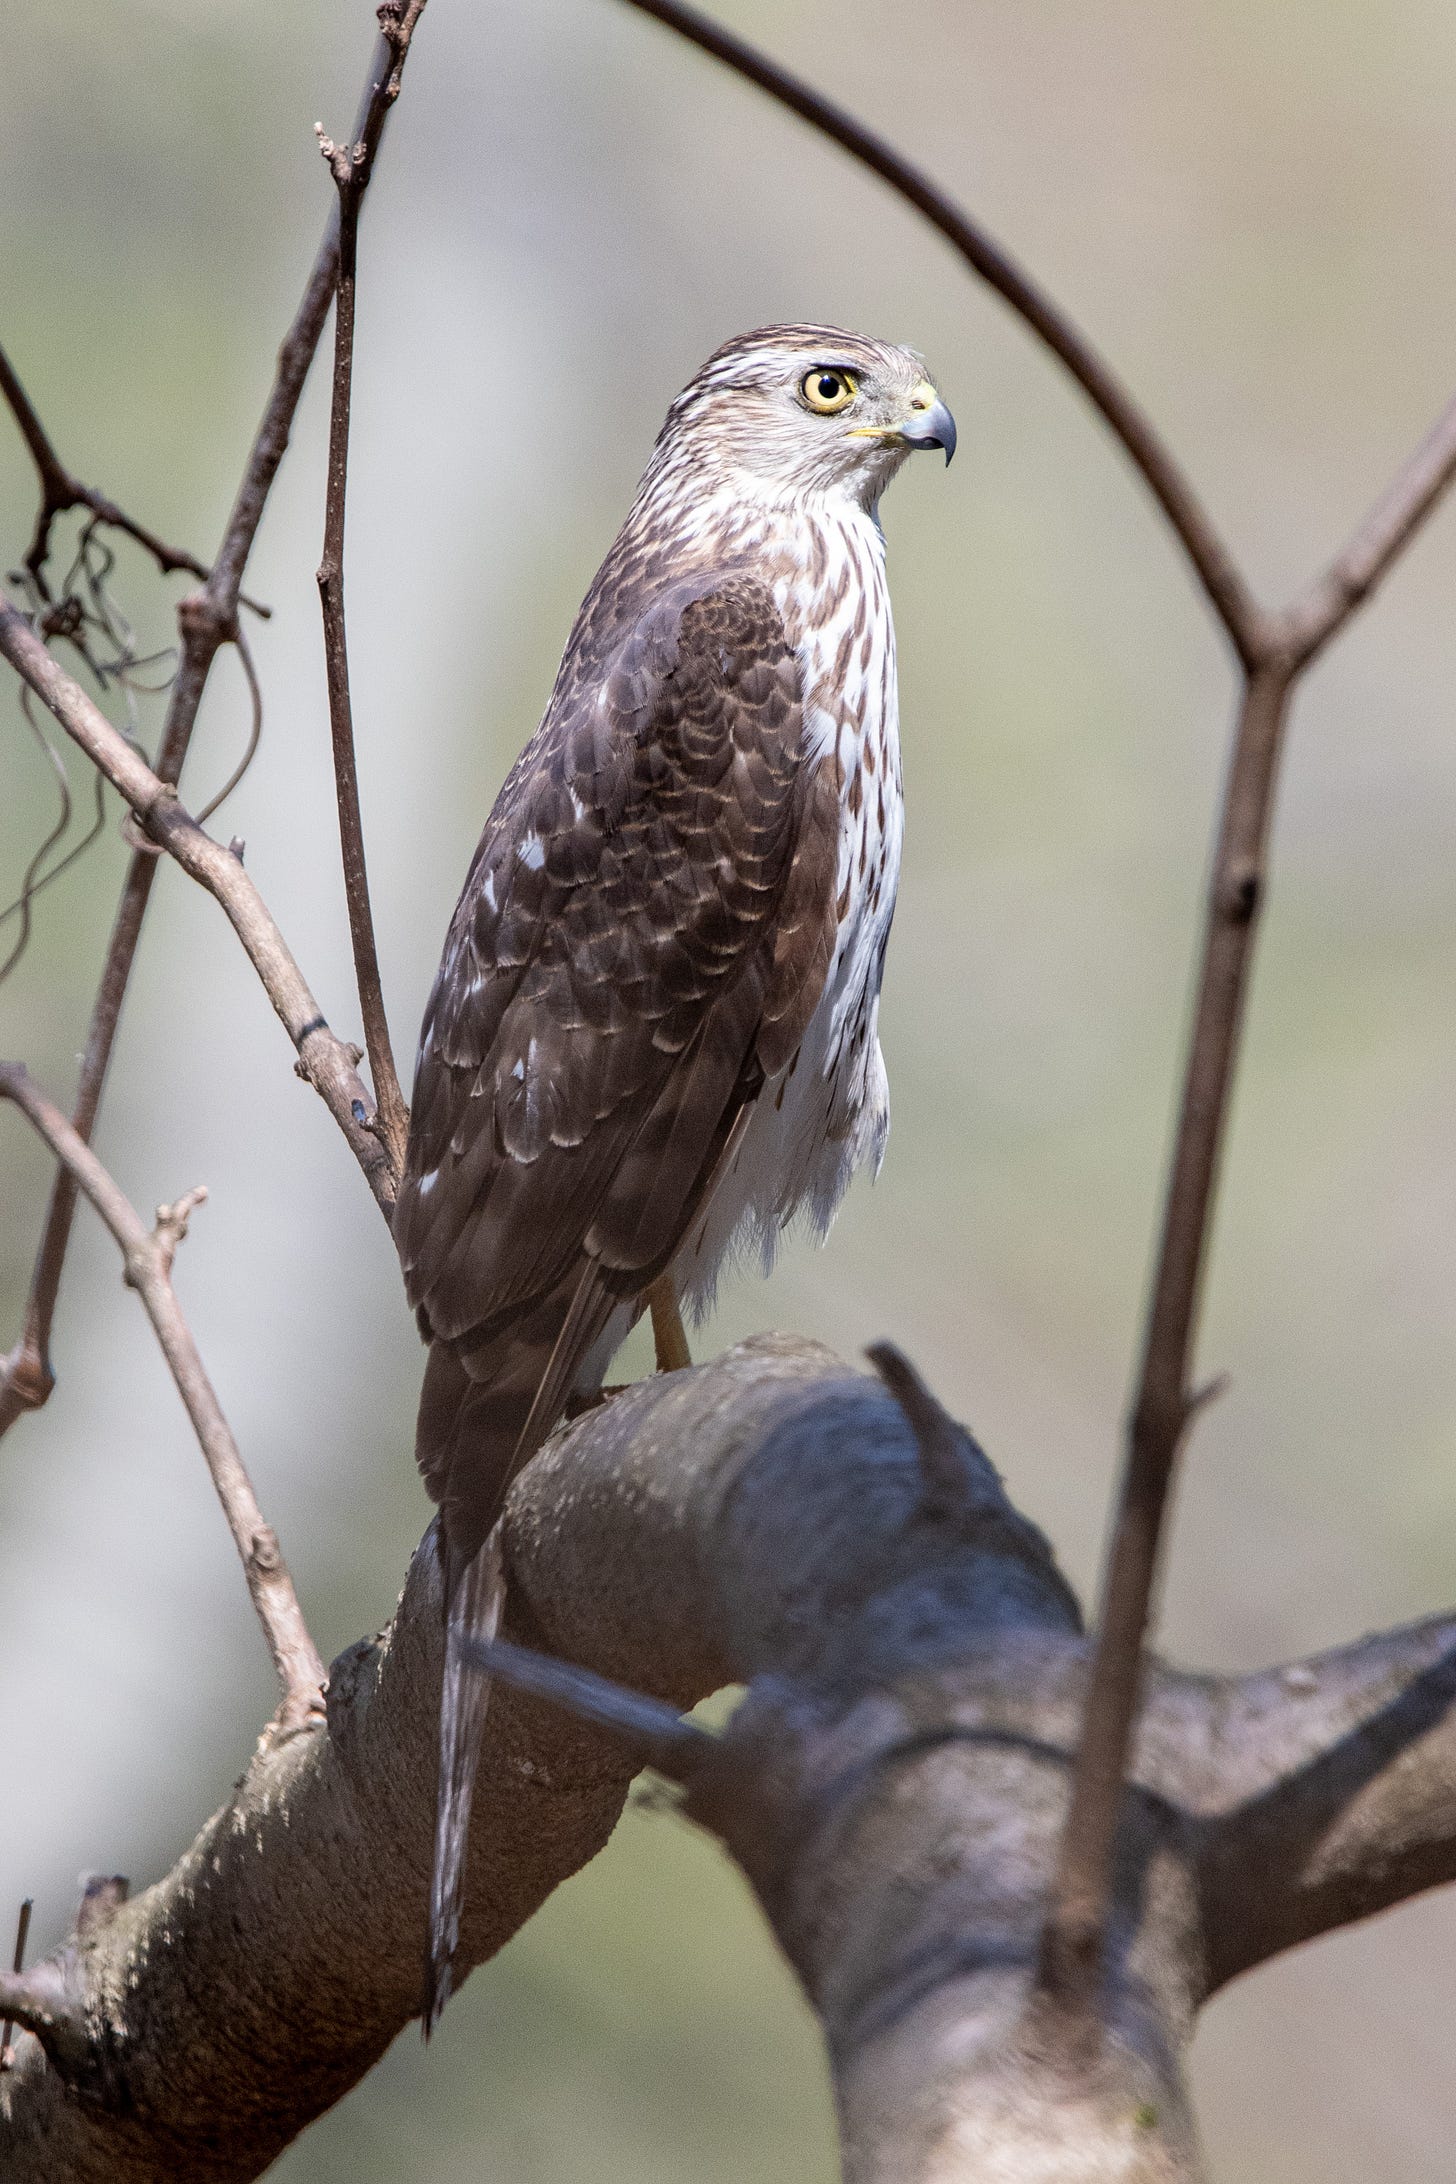 A Cooper's hawk in profile, looking regal and severe